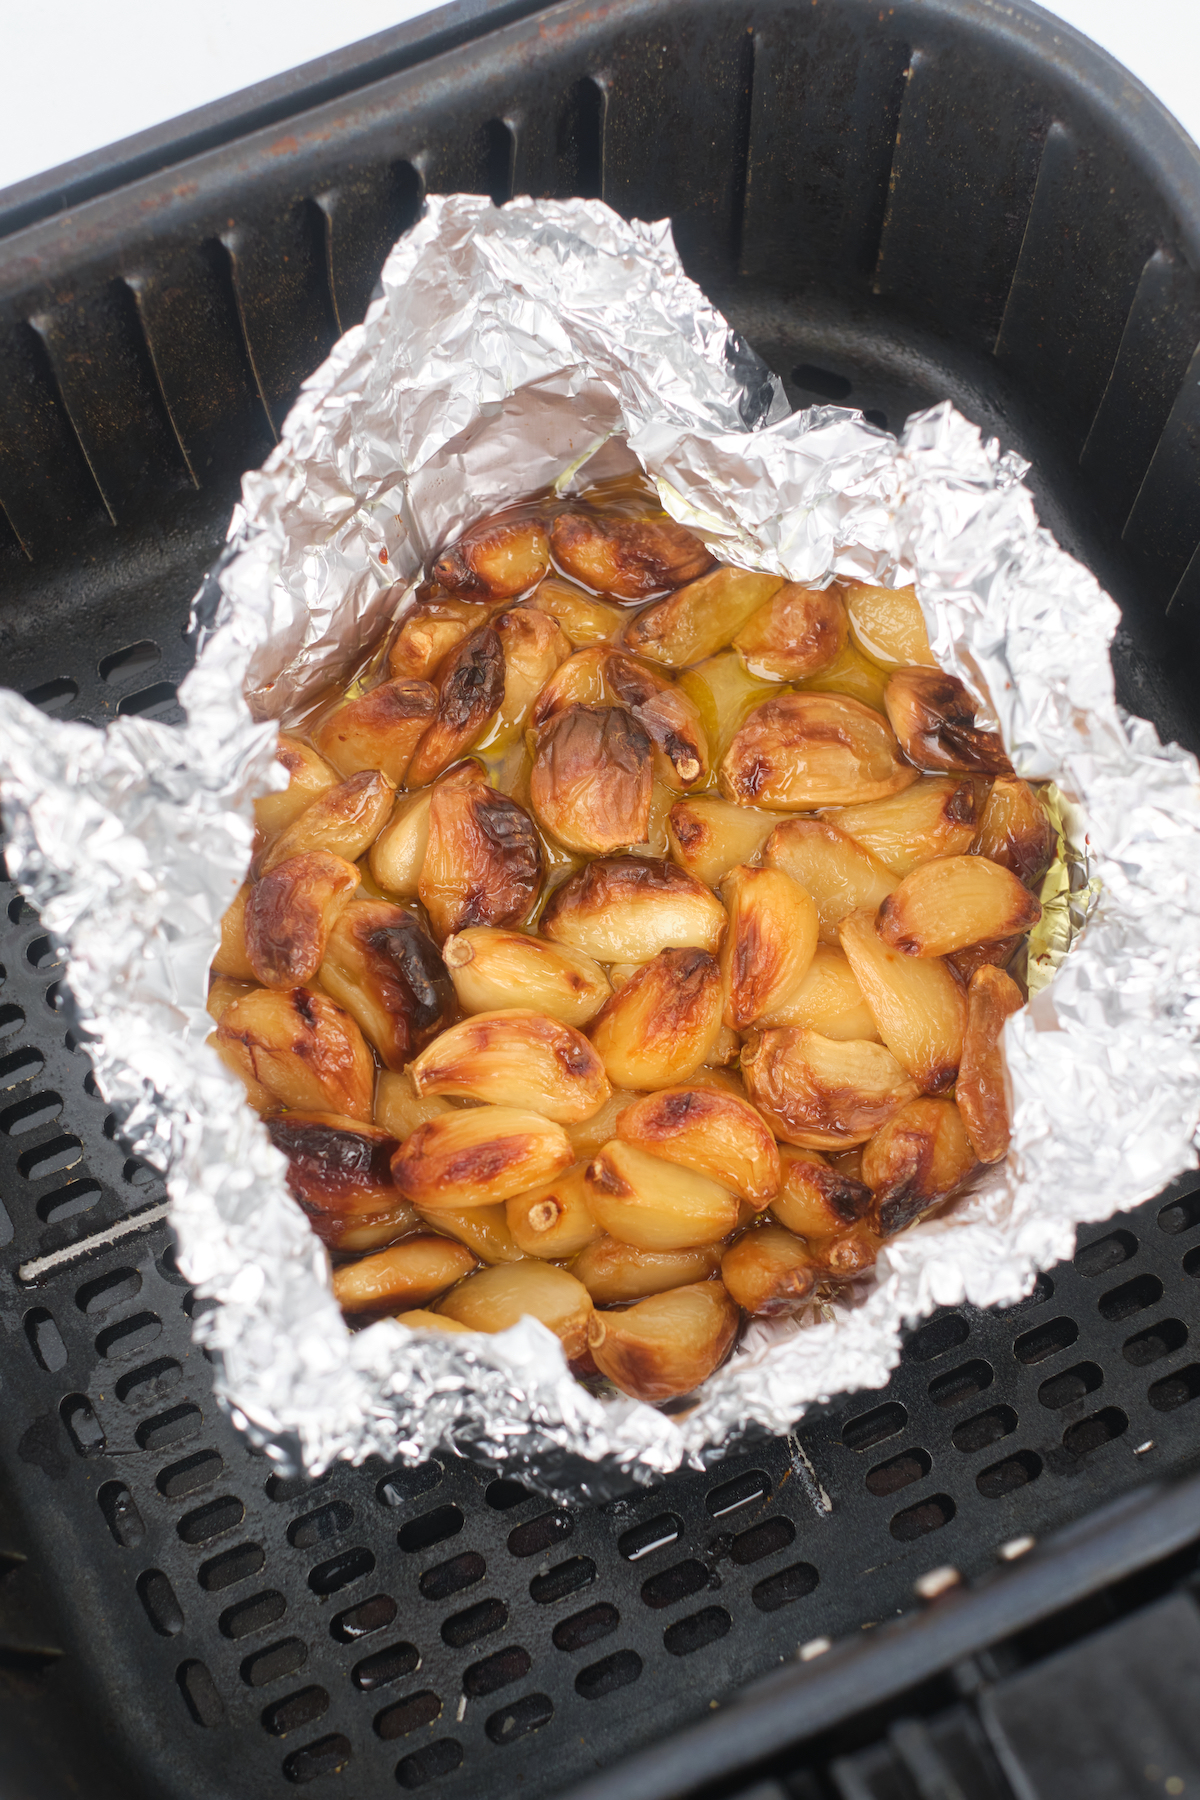 the completed roasted garlic in air fryer recipe